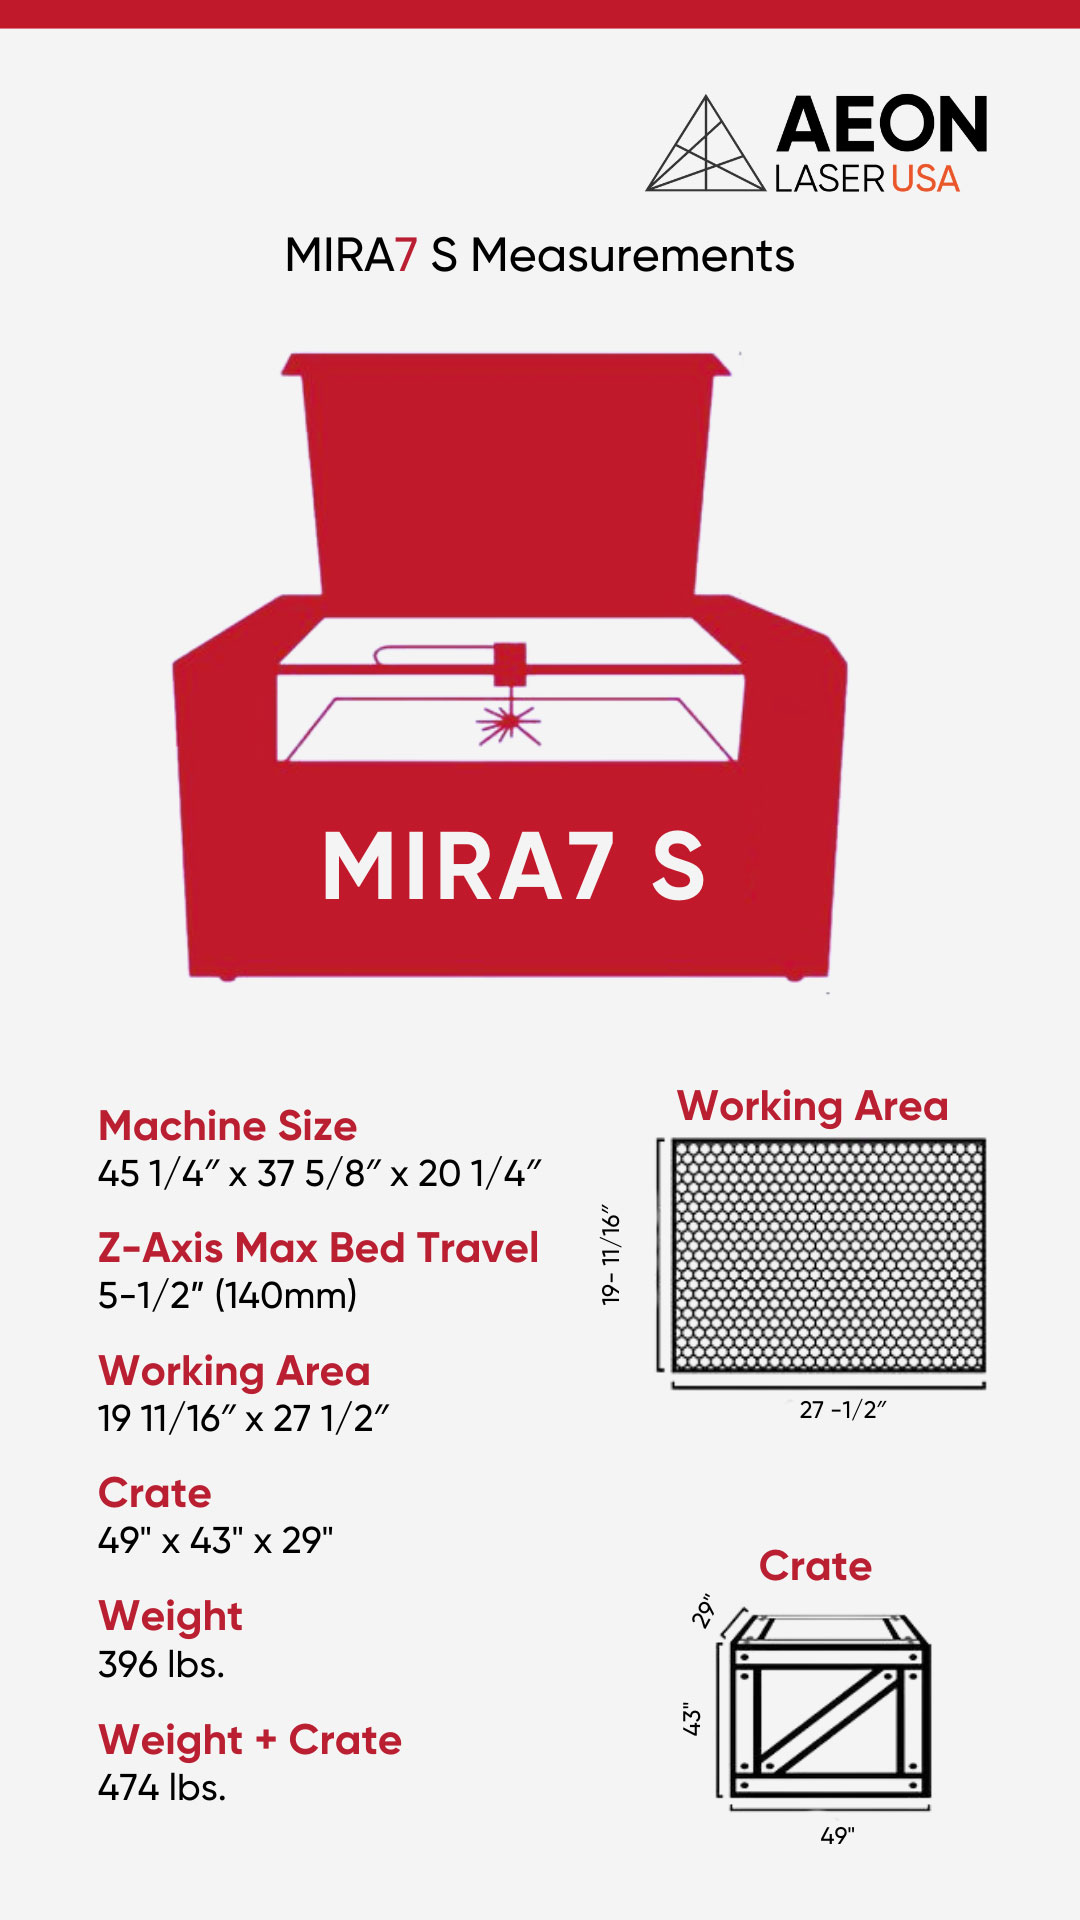 Graphic showing the dimensions of the MIRA 7 S laser, crate size, and weight info